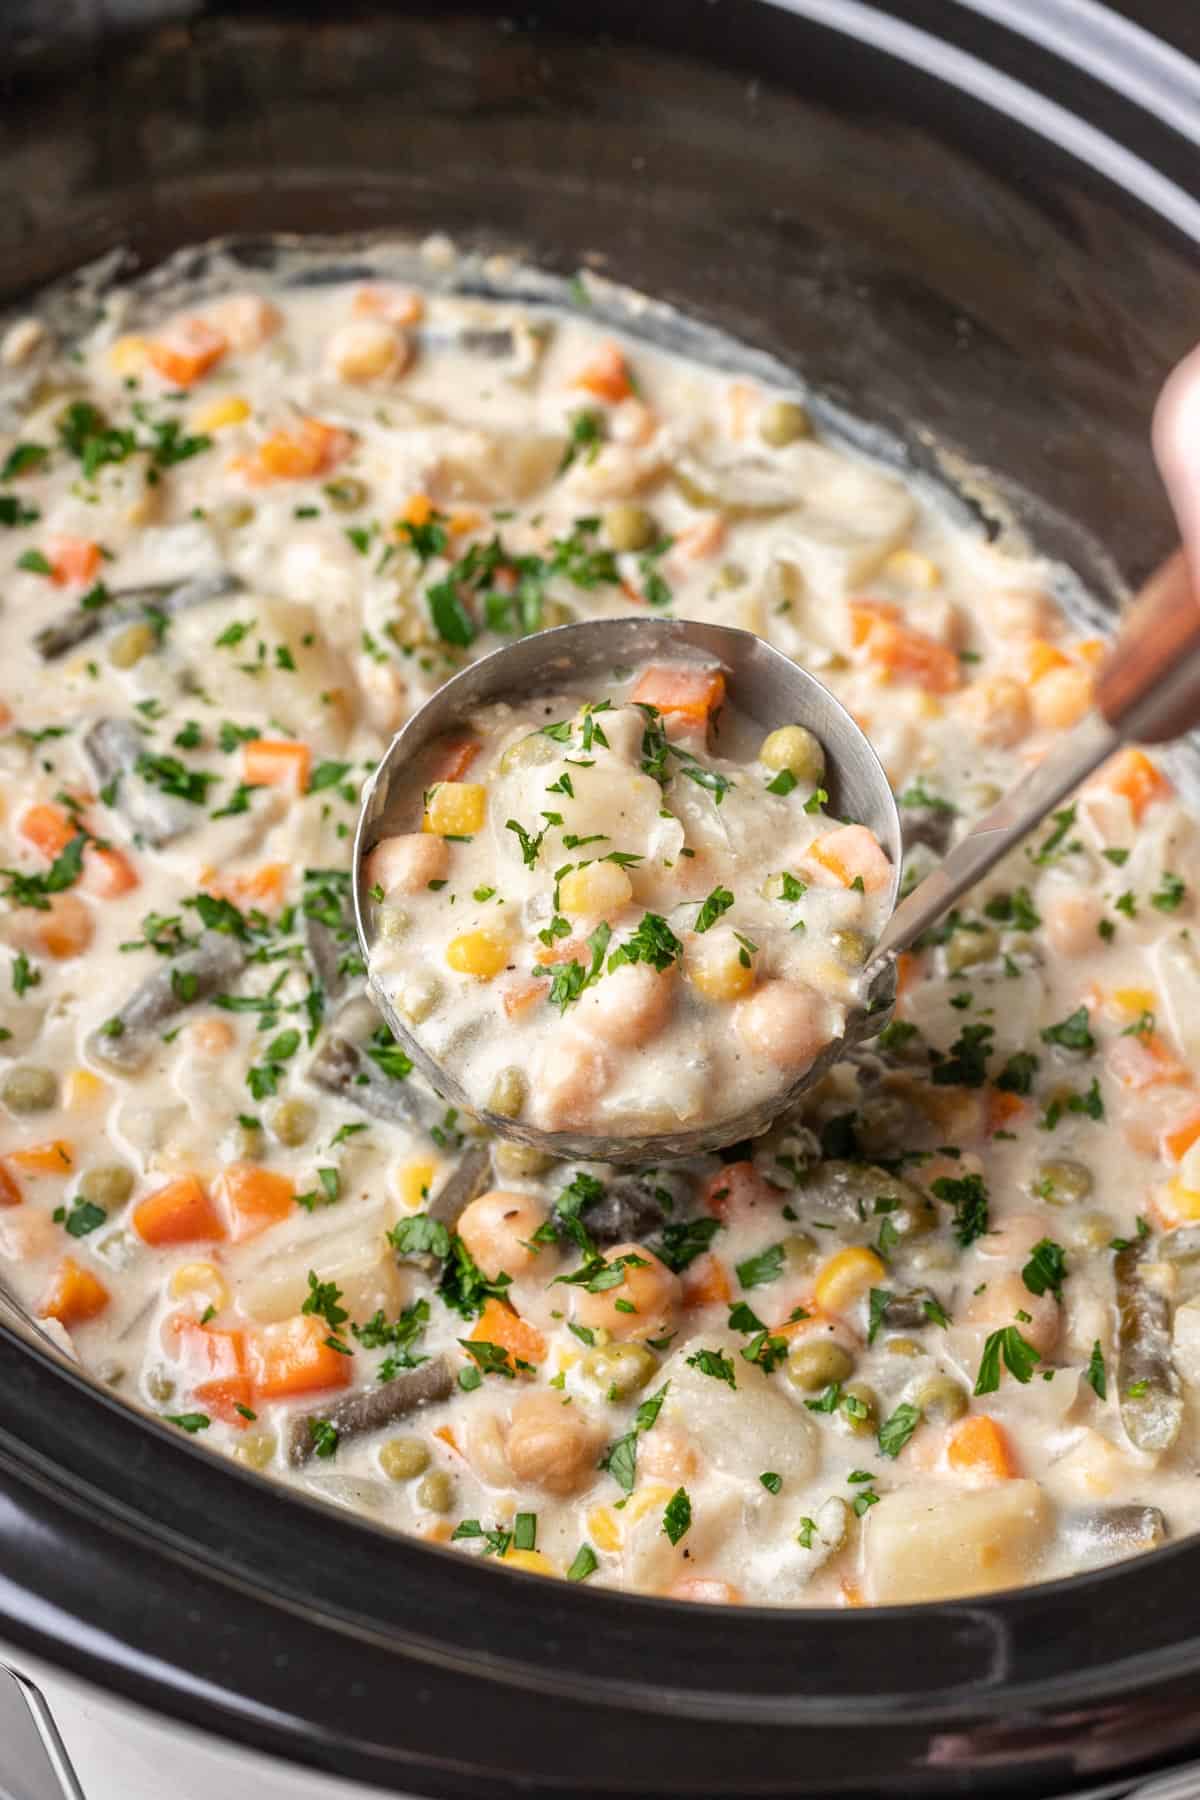 Slow cooker filled with vegan pot pie filling.